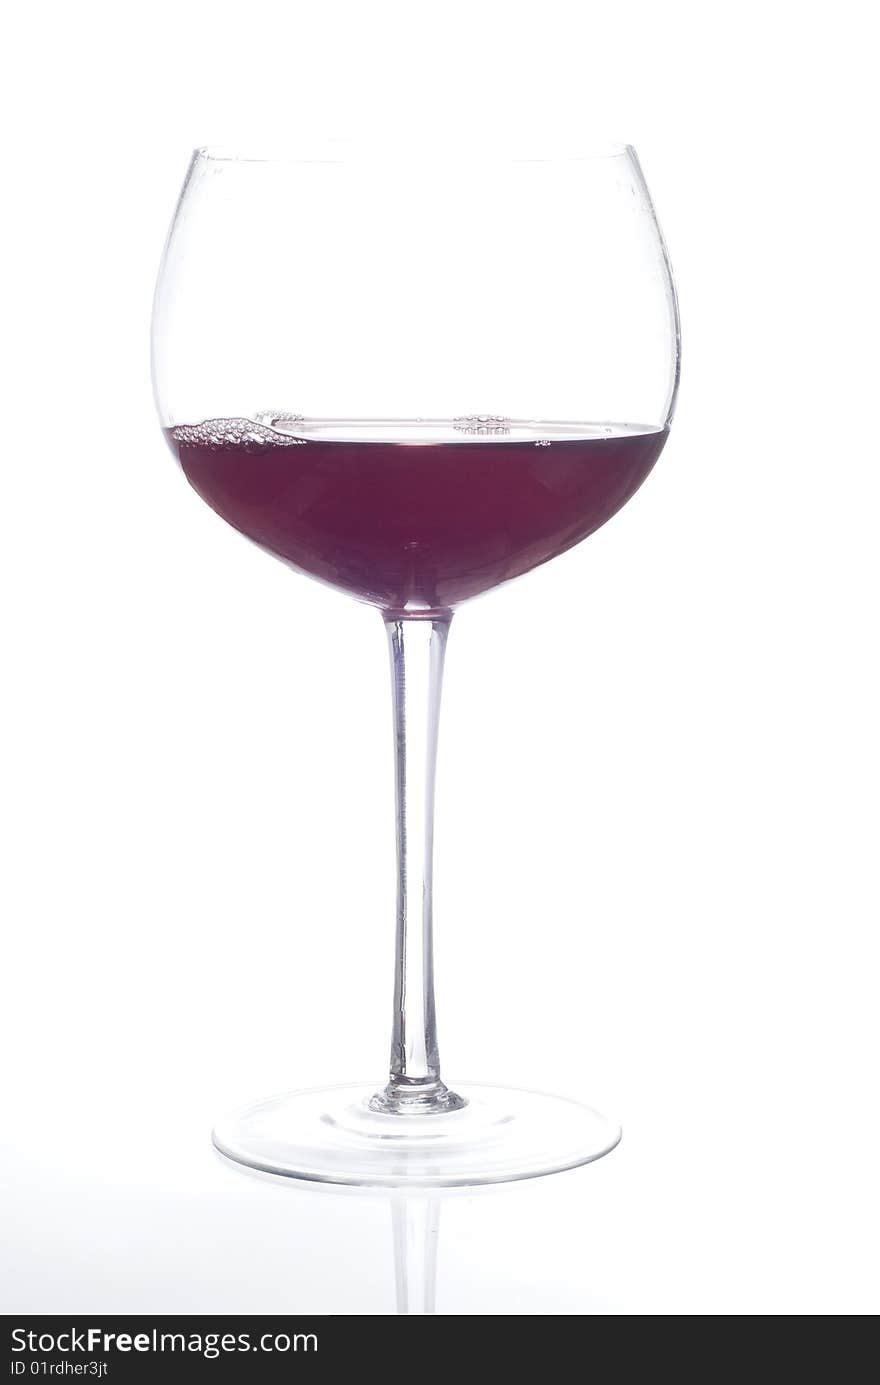 Glass of red beverage or wine